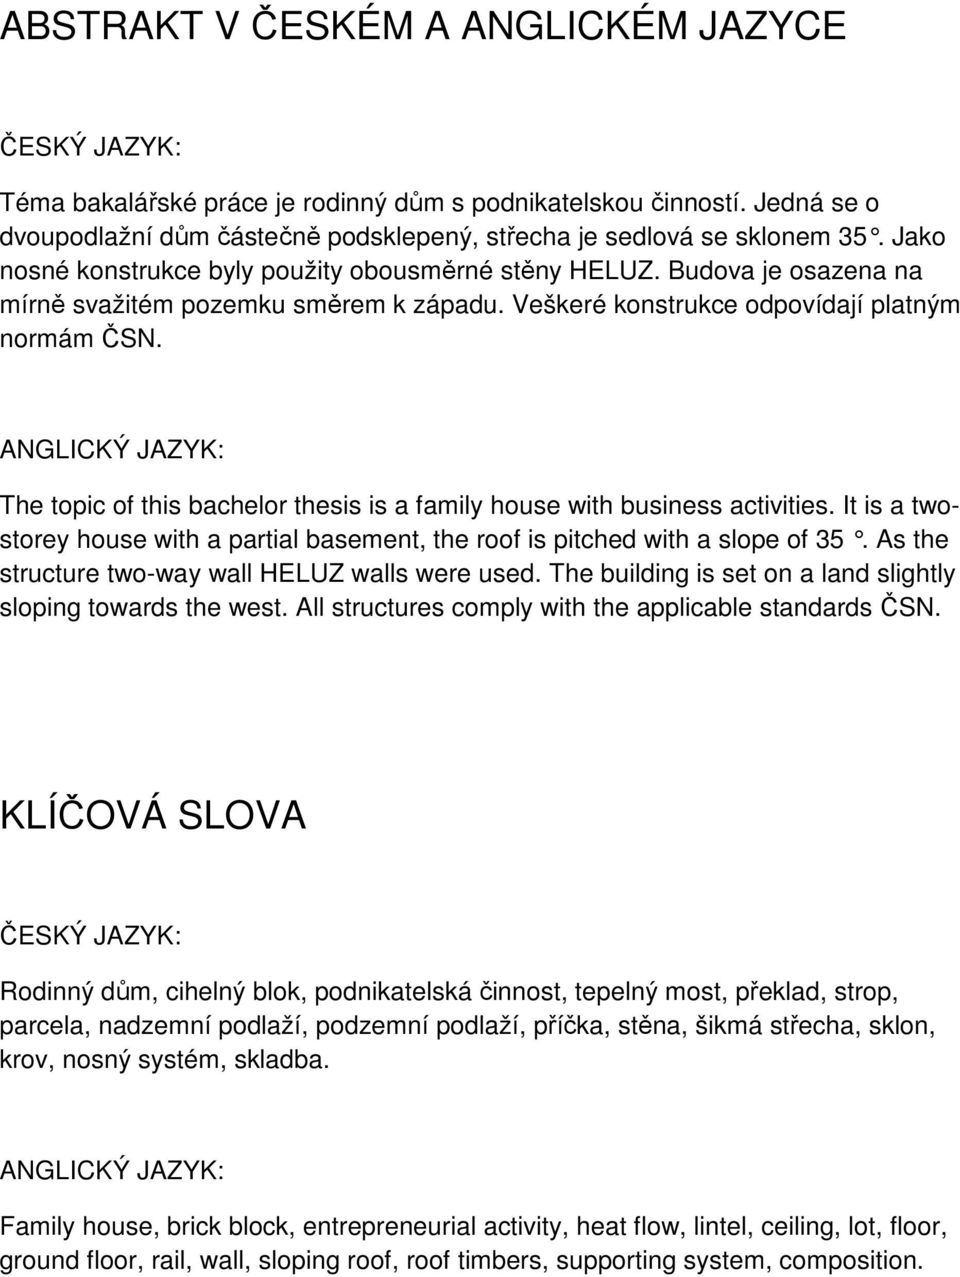 ANGLICKÝ JAZYK: The topic of this bachelor thesis is a family house with business activities. It is a twostorey house with a partial basement, the roof is pitched with a slope of 35.